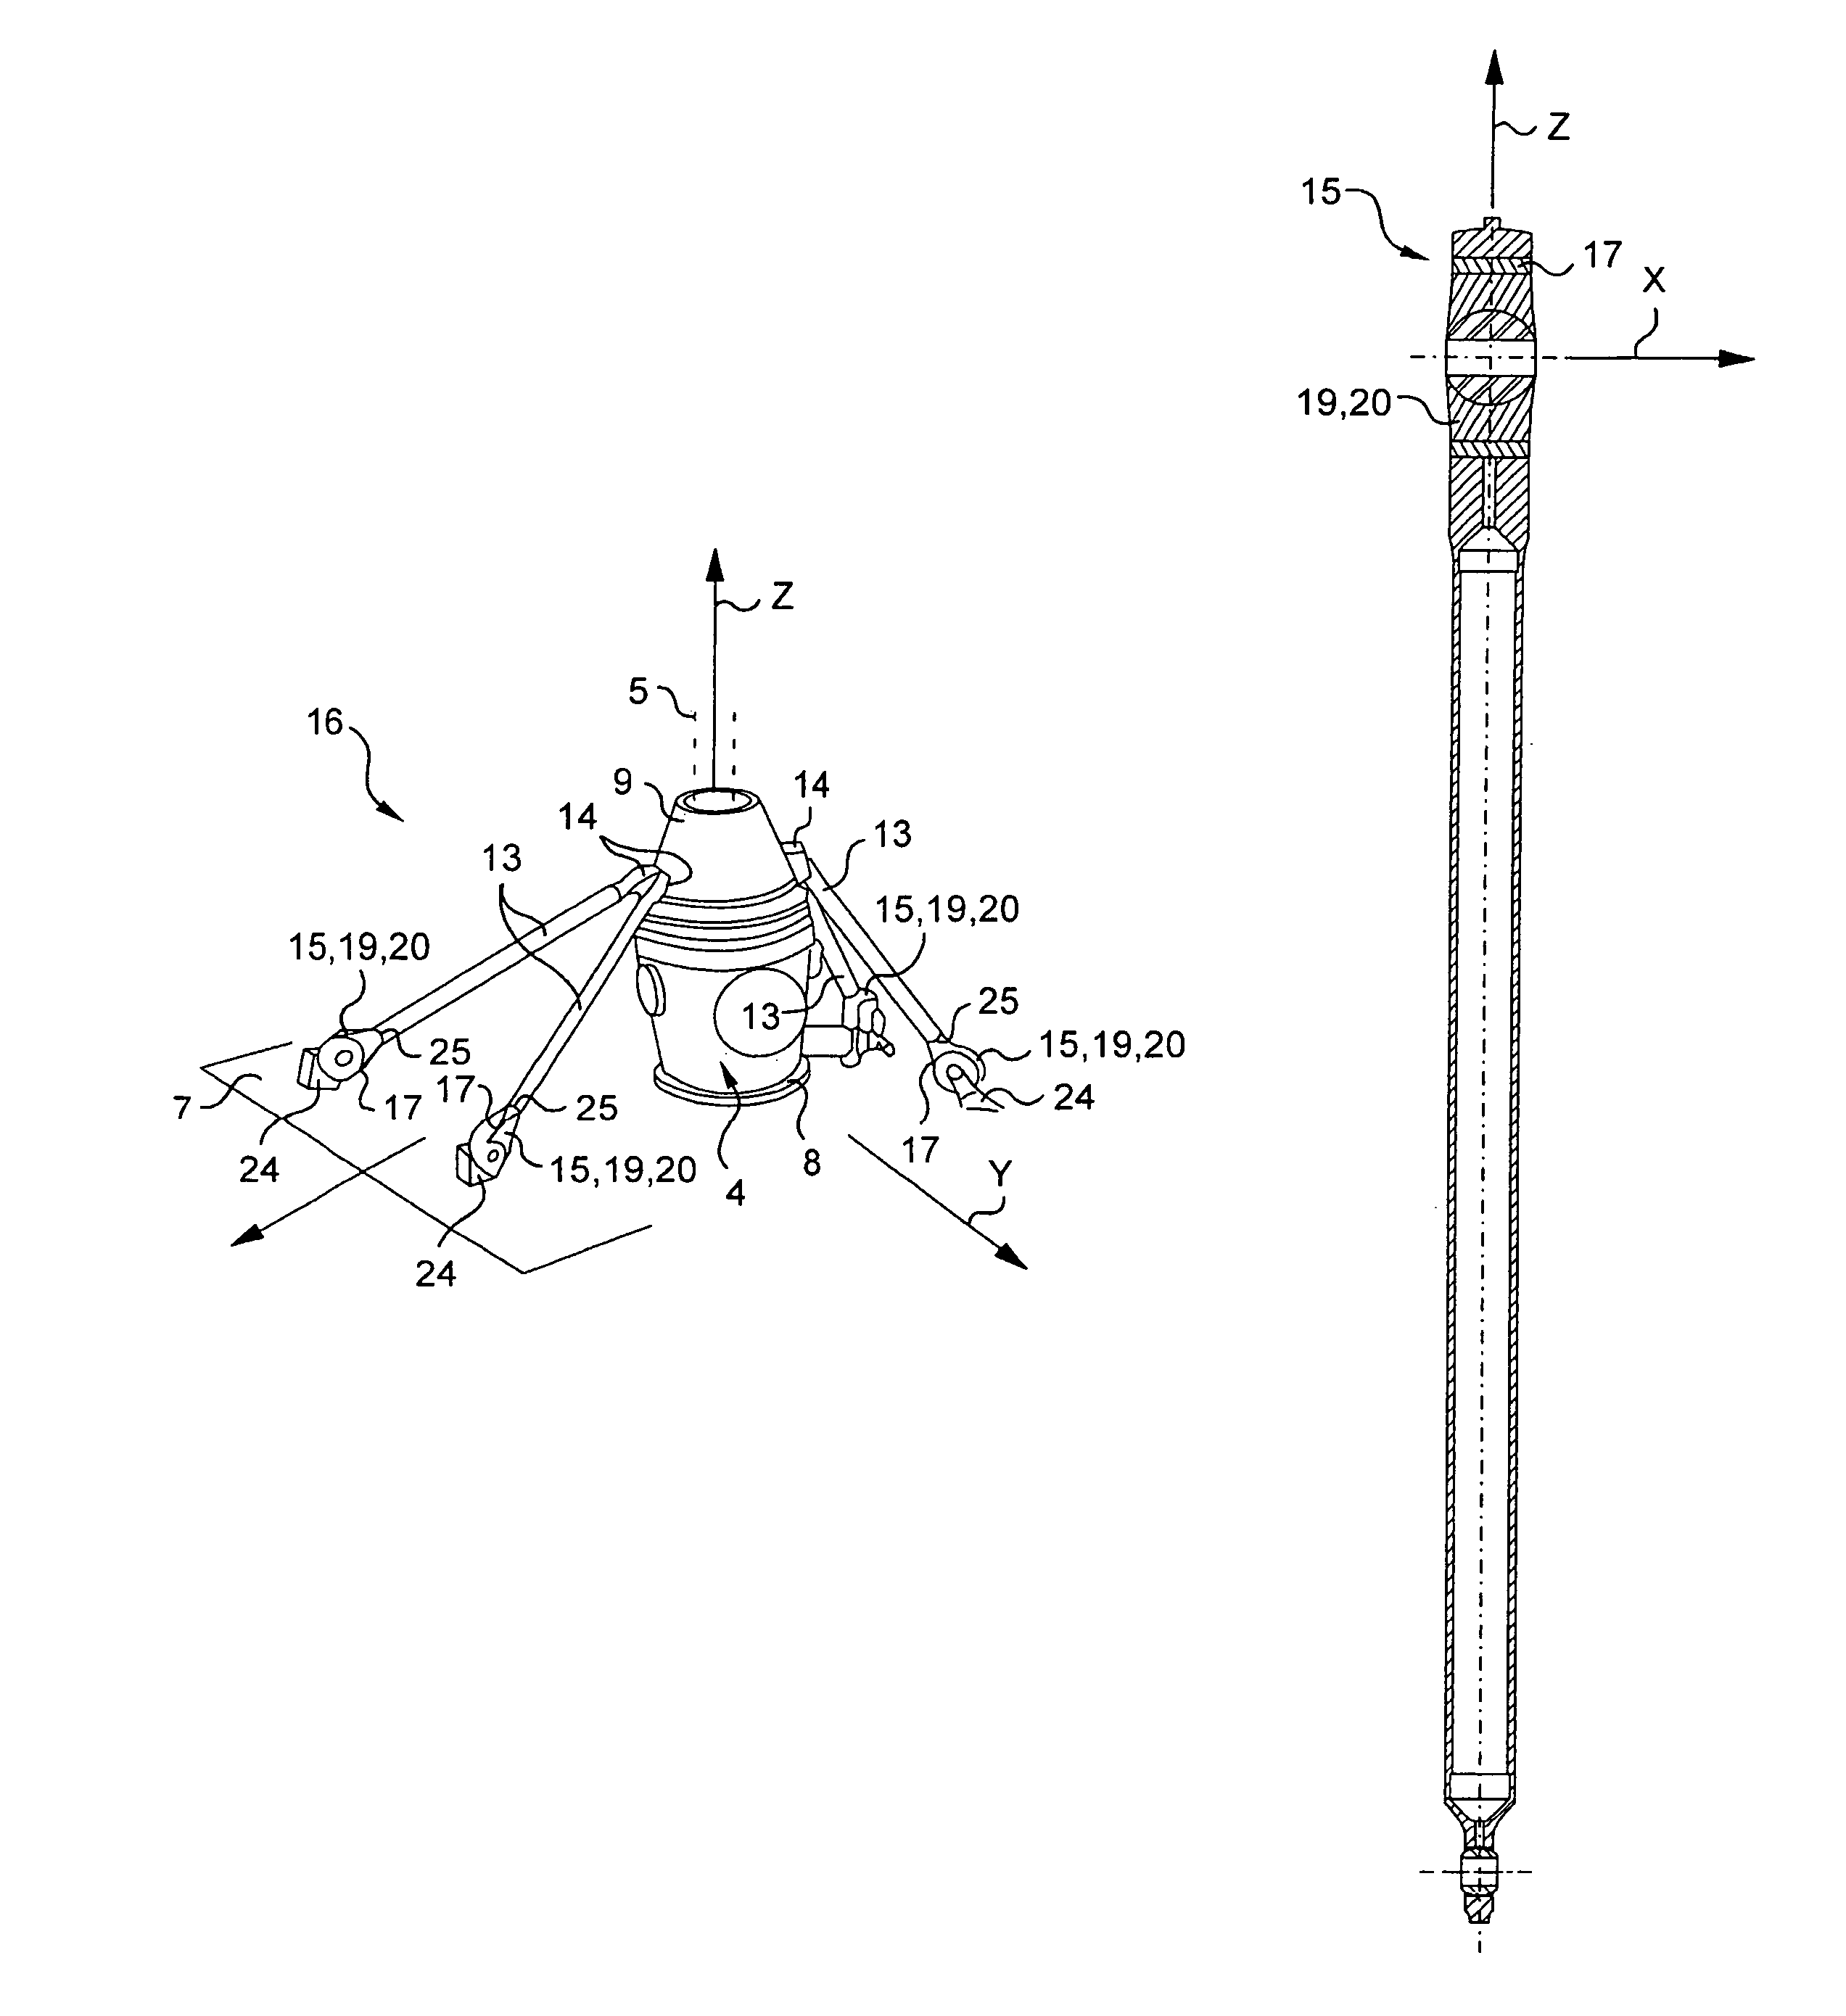 Method of selectively decoupling solidborne noise, a laminated ball joint, a mechanical connection, and an aircraft